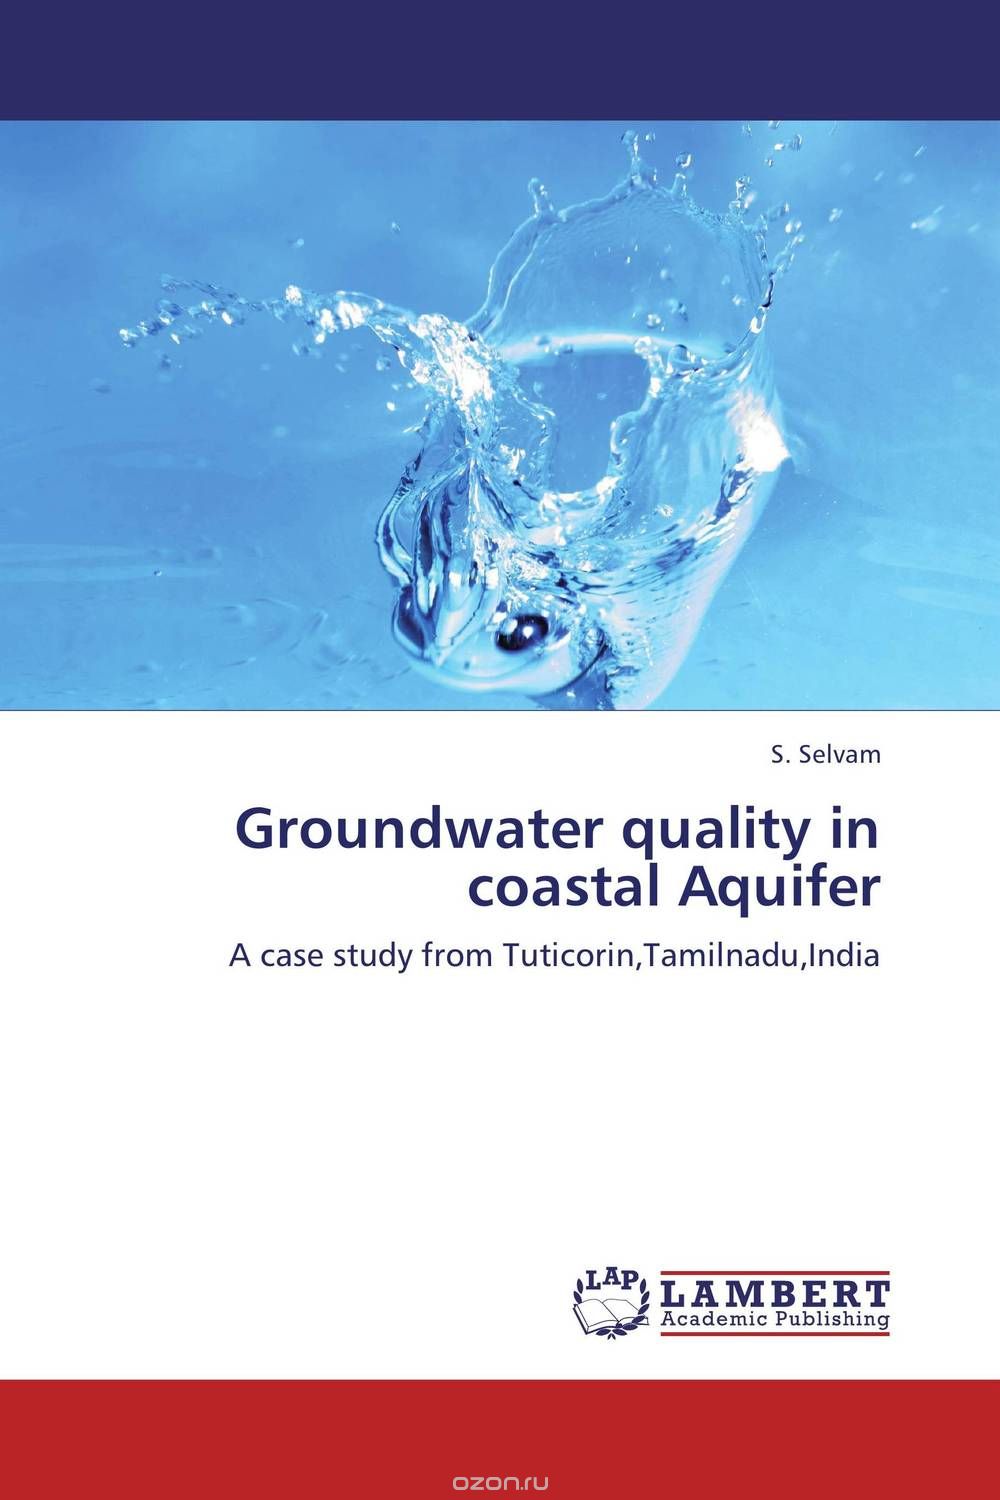 Groundwater quality in coastal Aquifer